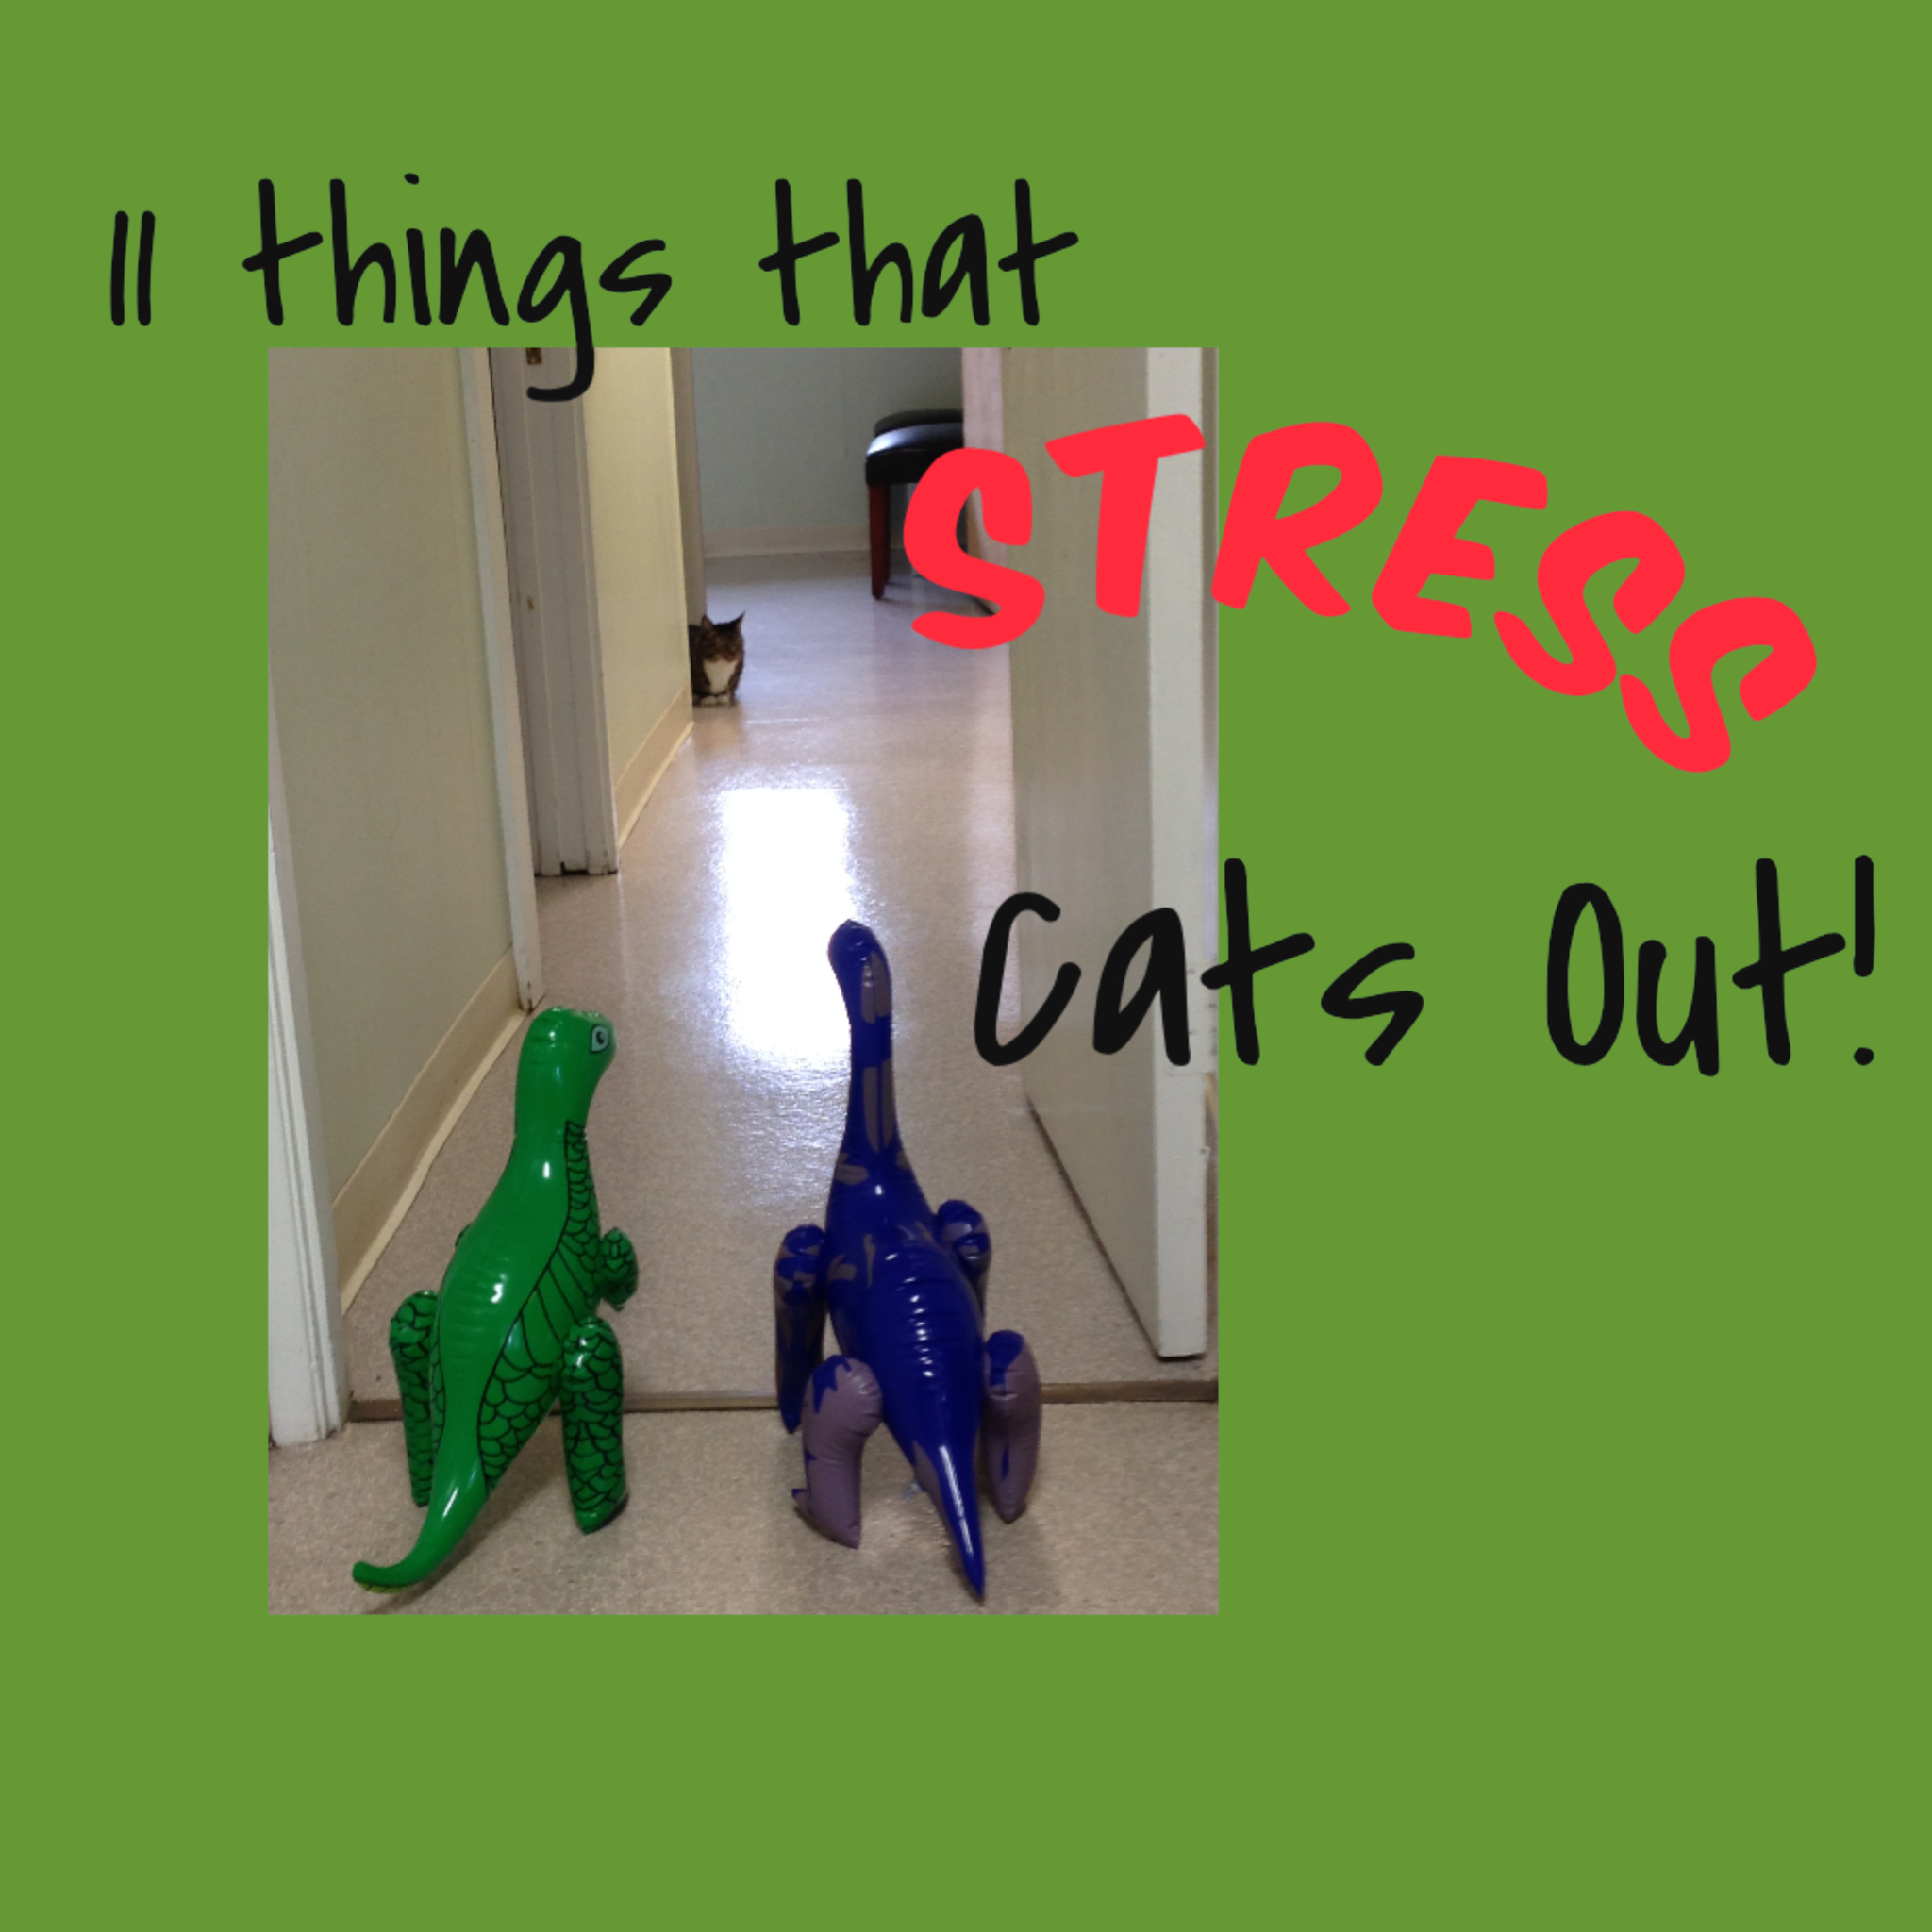 11 things that stress cats out